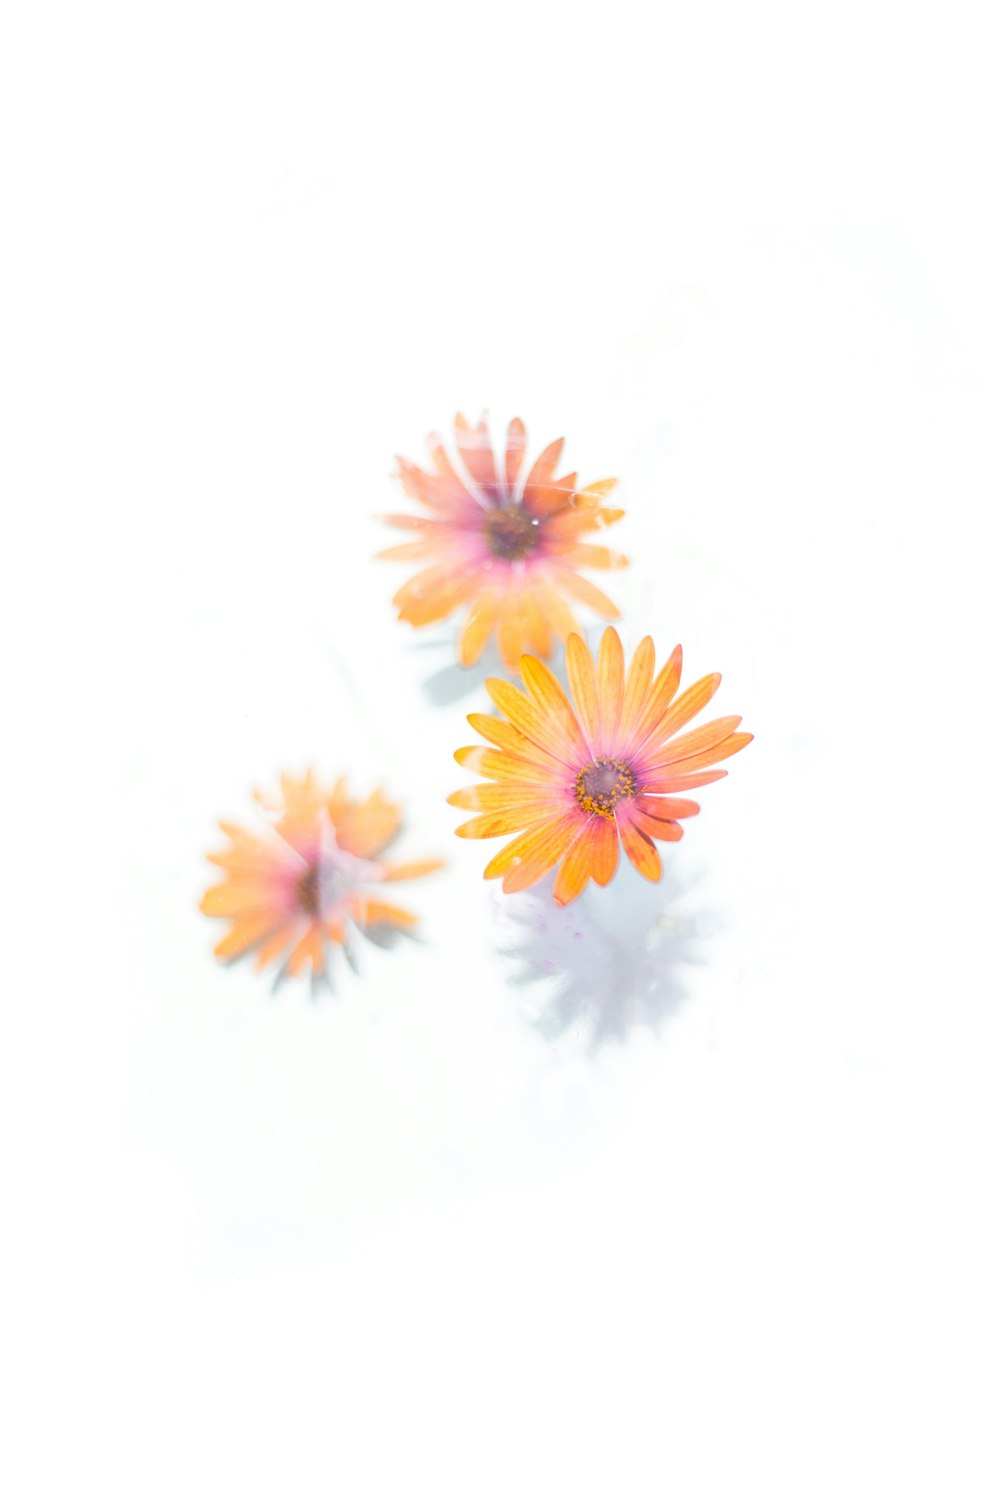 blue and yellow flowers on white background